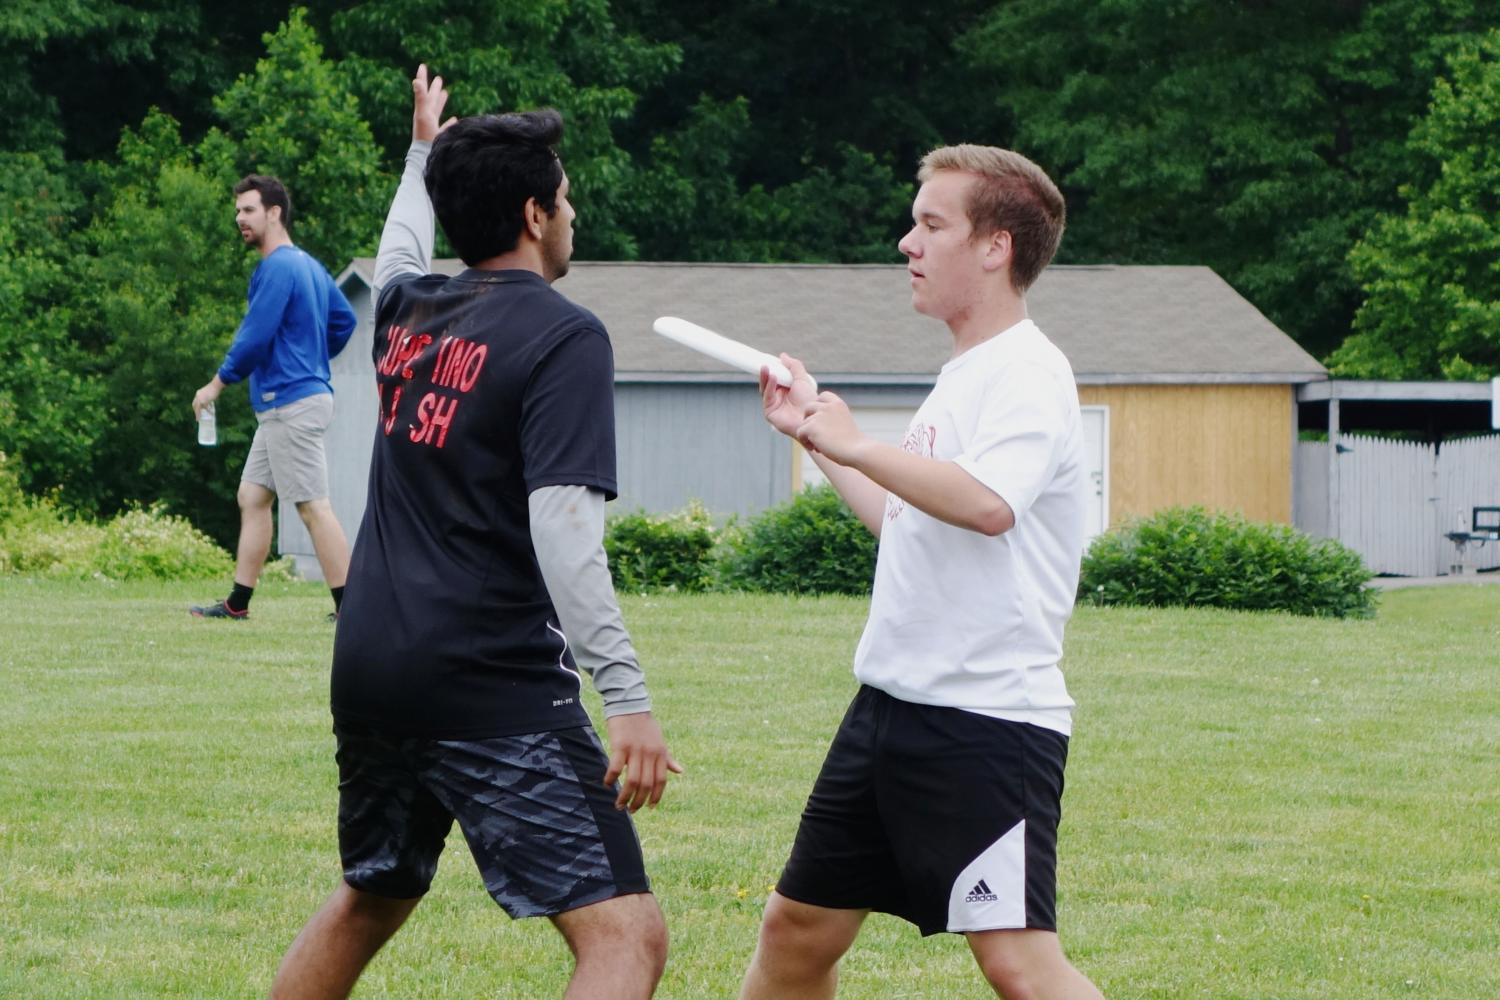 Senior Michael Krause passes the frisbee to a teammate during an Ultimate Frisbee game.  The team practices twice a week during its fall season and three to four times a week during its spring season in preparation for weekly games, weekend tournaments and the Virginia State Ultimate Tournament in the spring.  